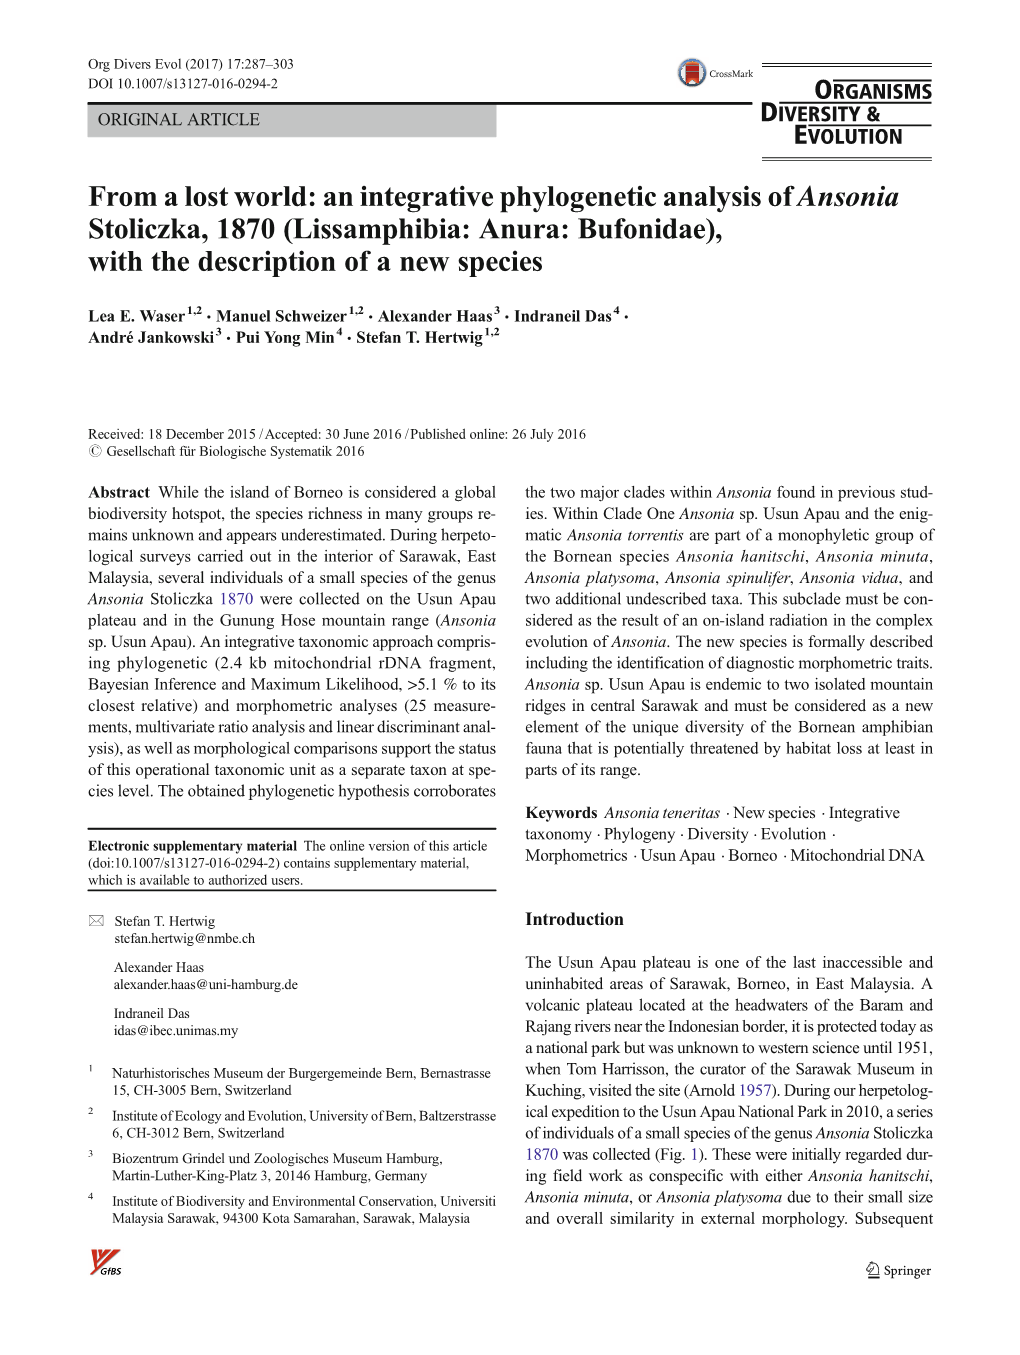 An Integrative Phylogenetic Analysis of Ansonia Stoliczka, 1870 (Lissamphibia: Anura: Bufonidae), with the Description of a New Species